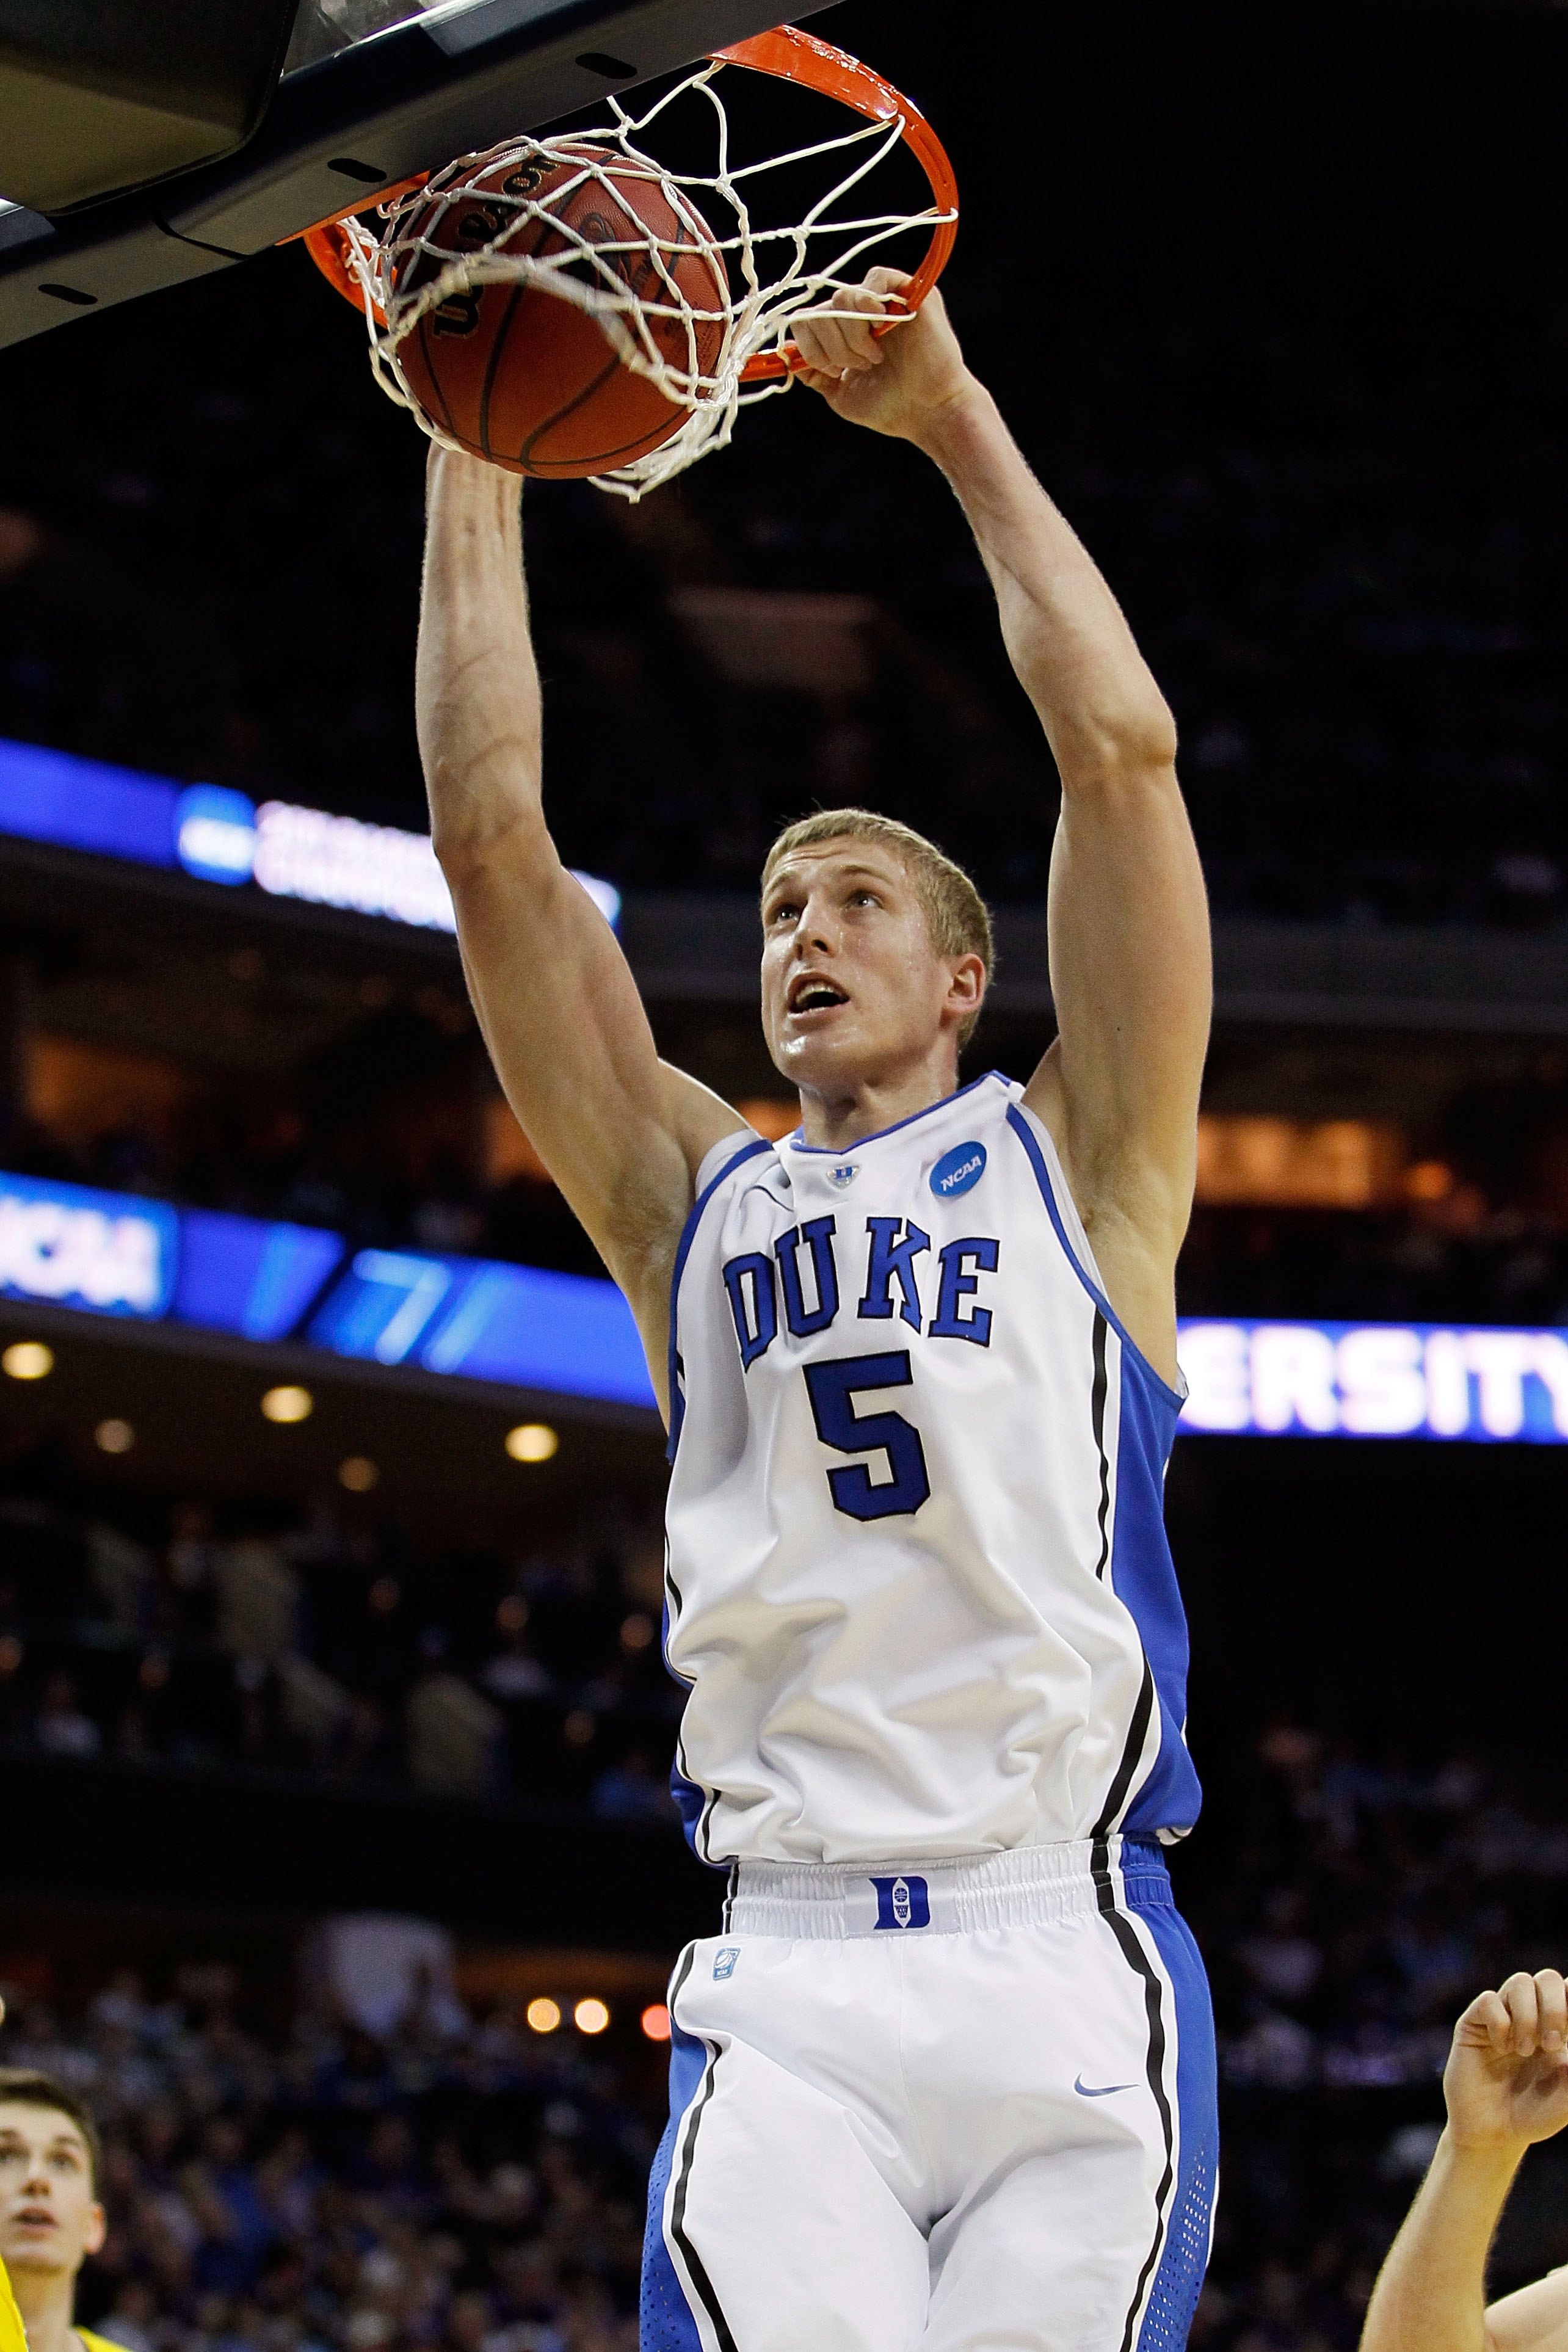 CHARLOTTE, NC - MARCH 20: Mason Plumlee #5 of the Duke Blue Devils dunks the ball in the first half while taking on the Michigan Wolverines  during the third round of the 2011 NCAA men's basketball tournament at Time Warner Cable Arena on March 20, 2011 i